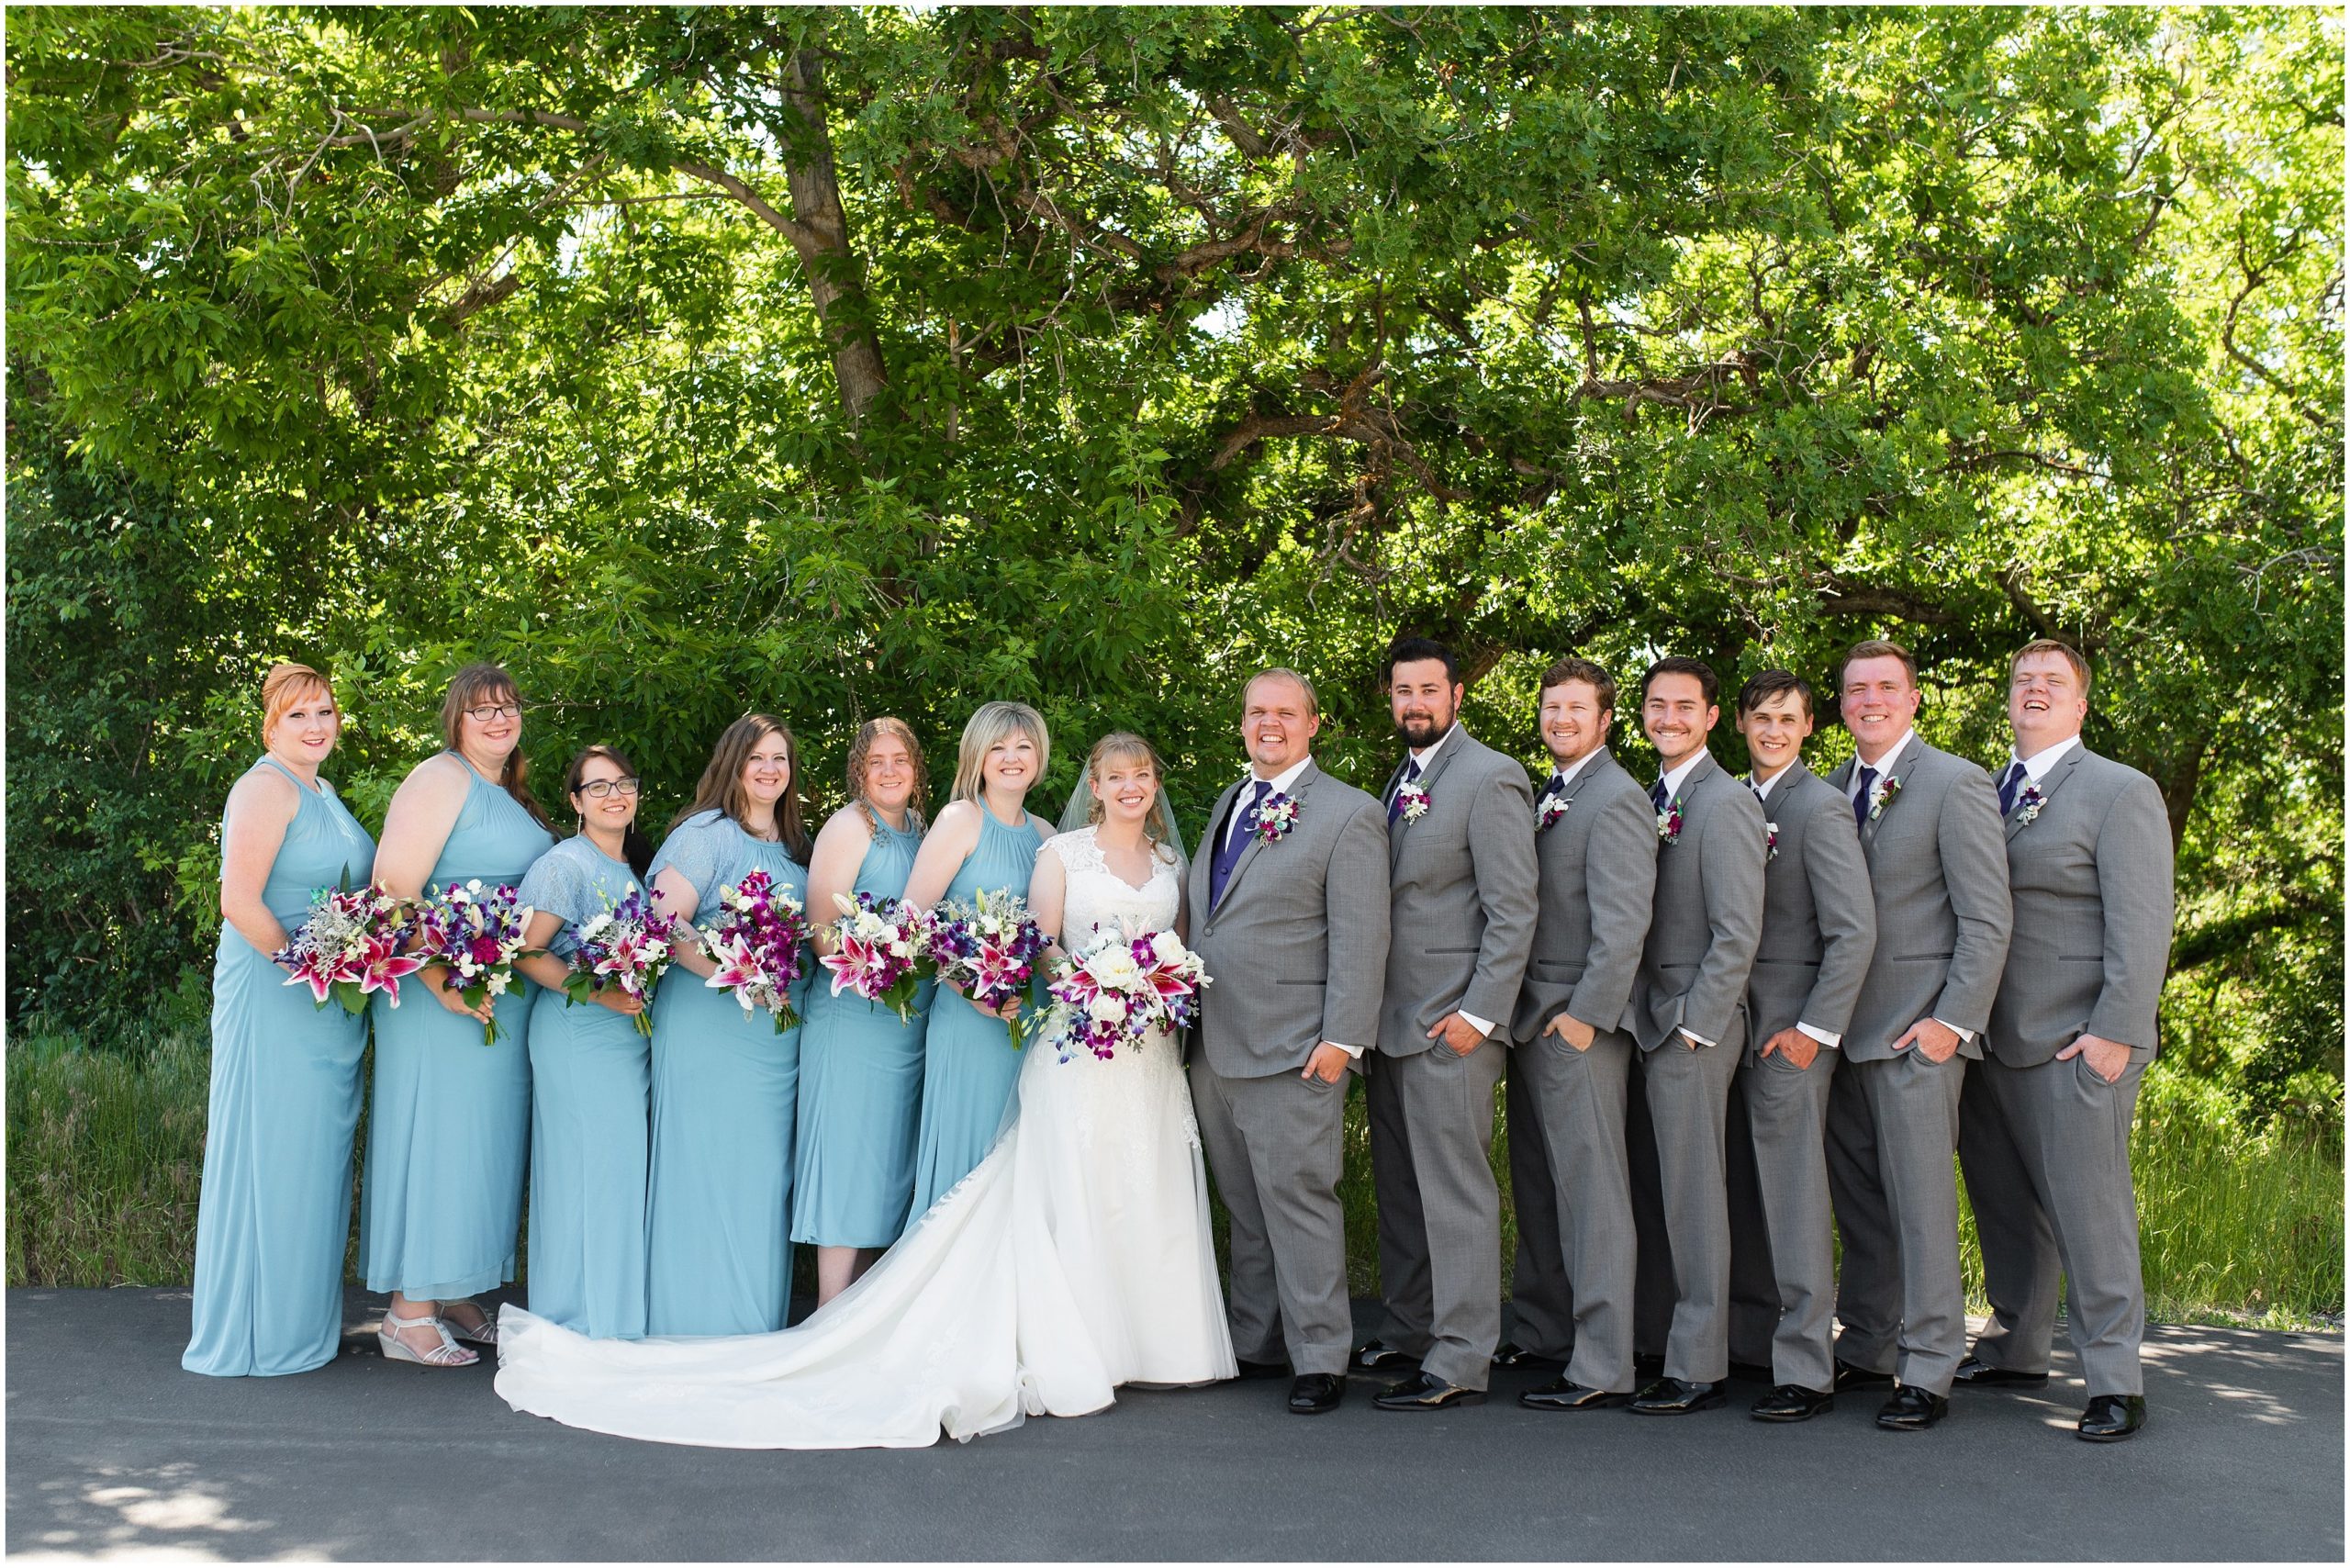 Bridesmaids in Malibu blue dresses with orchid bouquets and Groomsmen in grey suits and purple vests and ties | Orchid Inspired Summer Wedding at Oak Hills Utah | Jessie and Dallin Photography